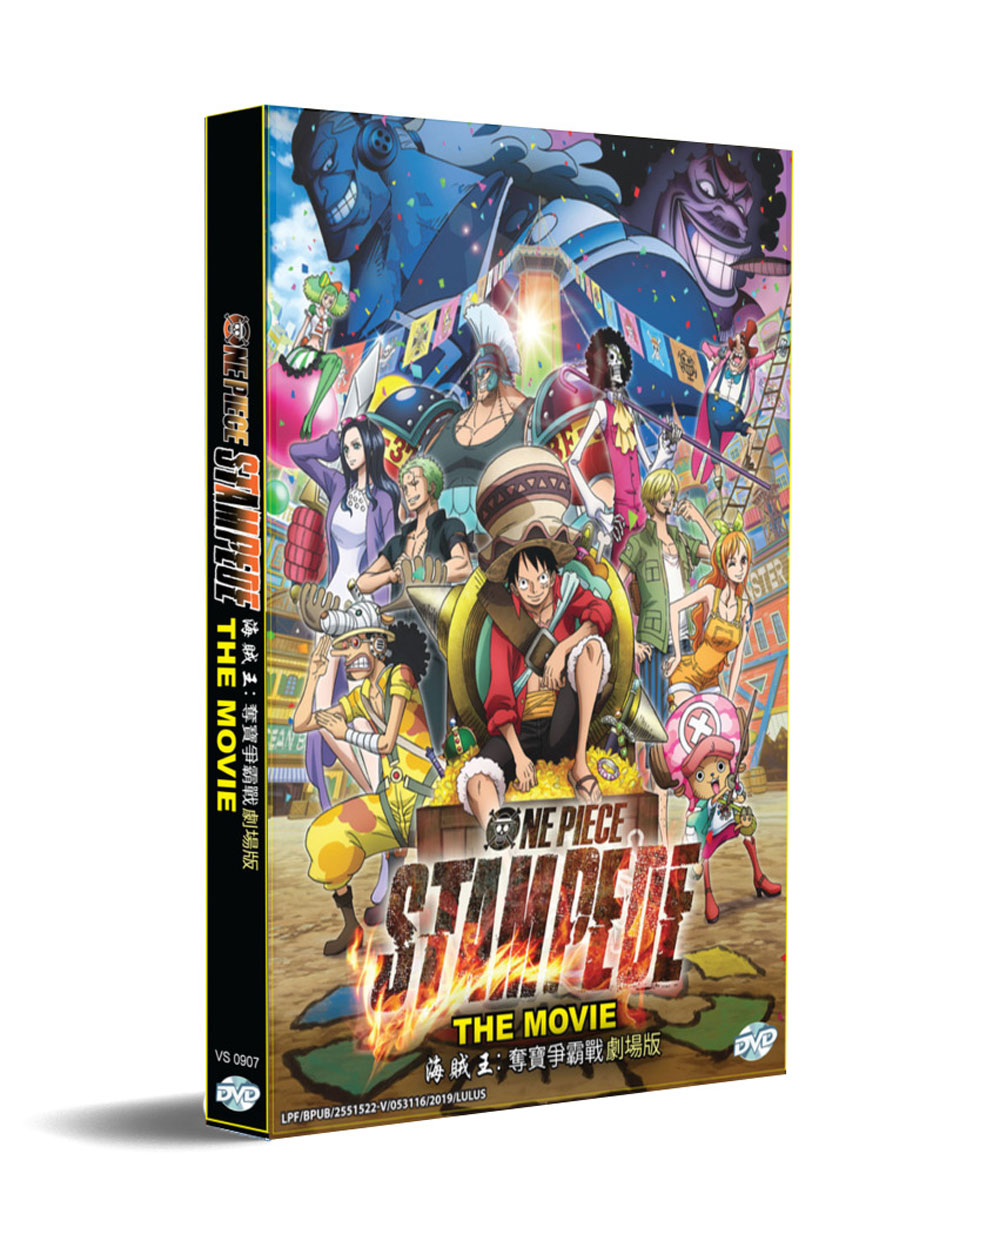 One Piece: Stampede The Movie	 (DVD) (2019) Anime